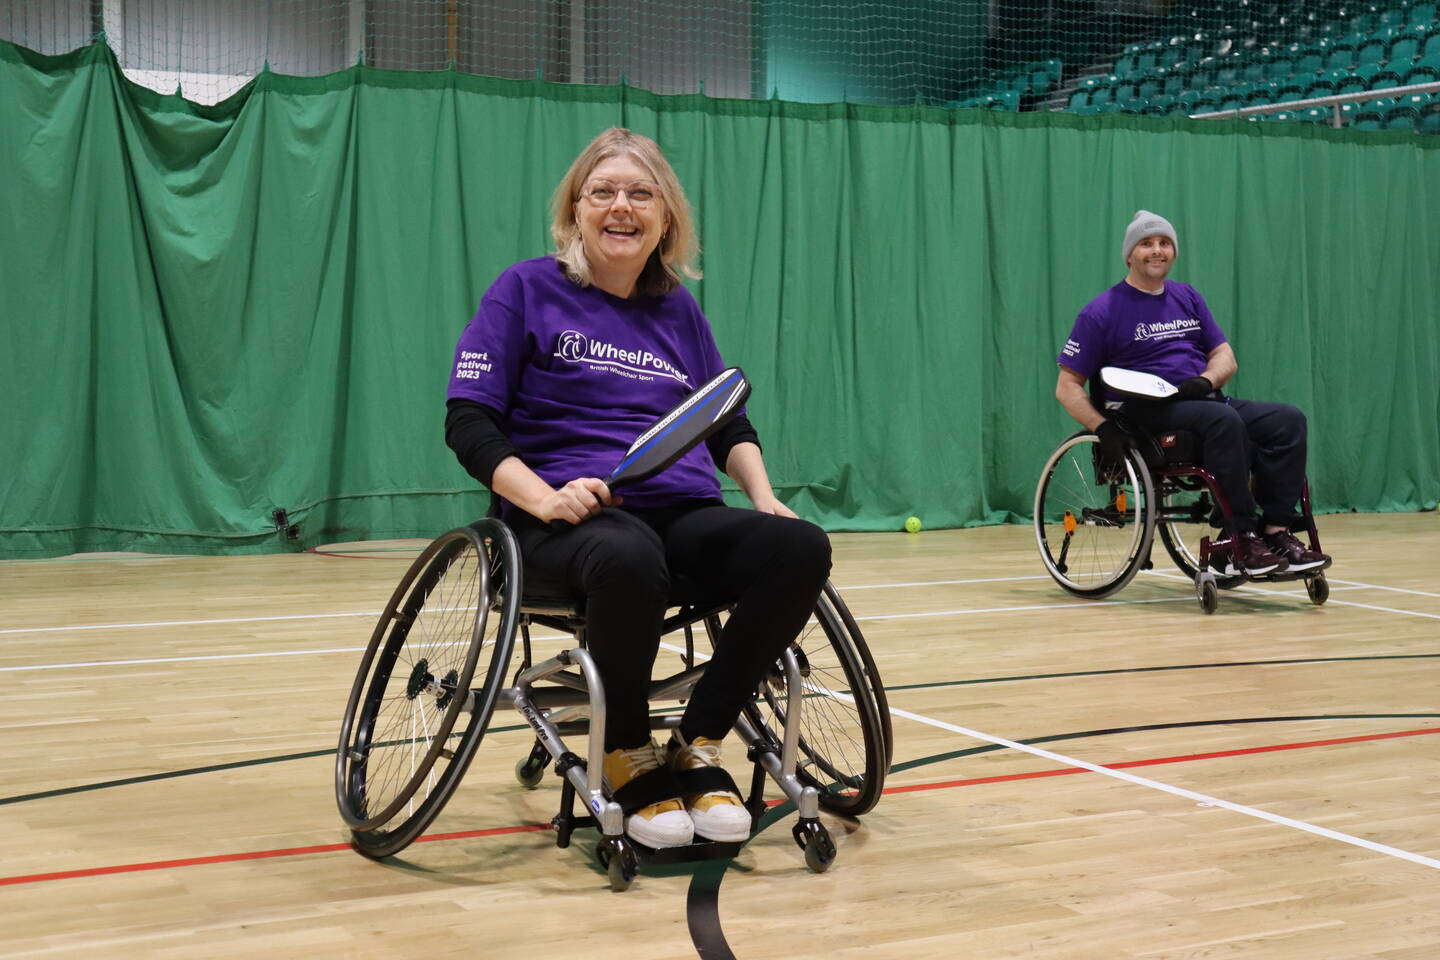 A woman in a wheelchair smiles holding a tennis racket.